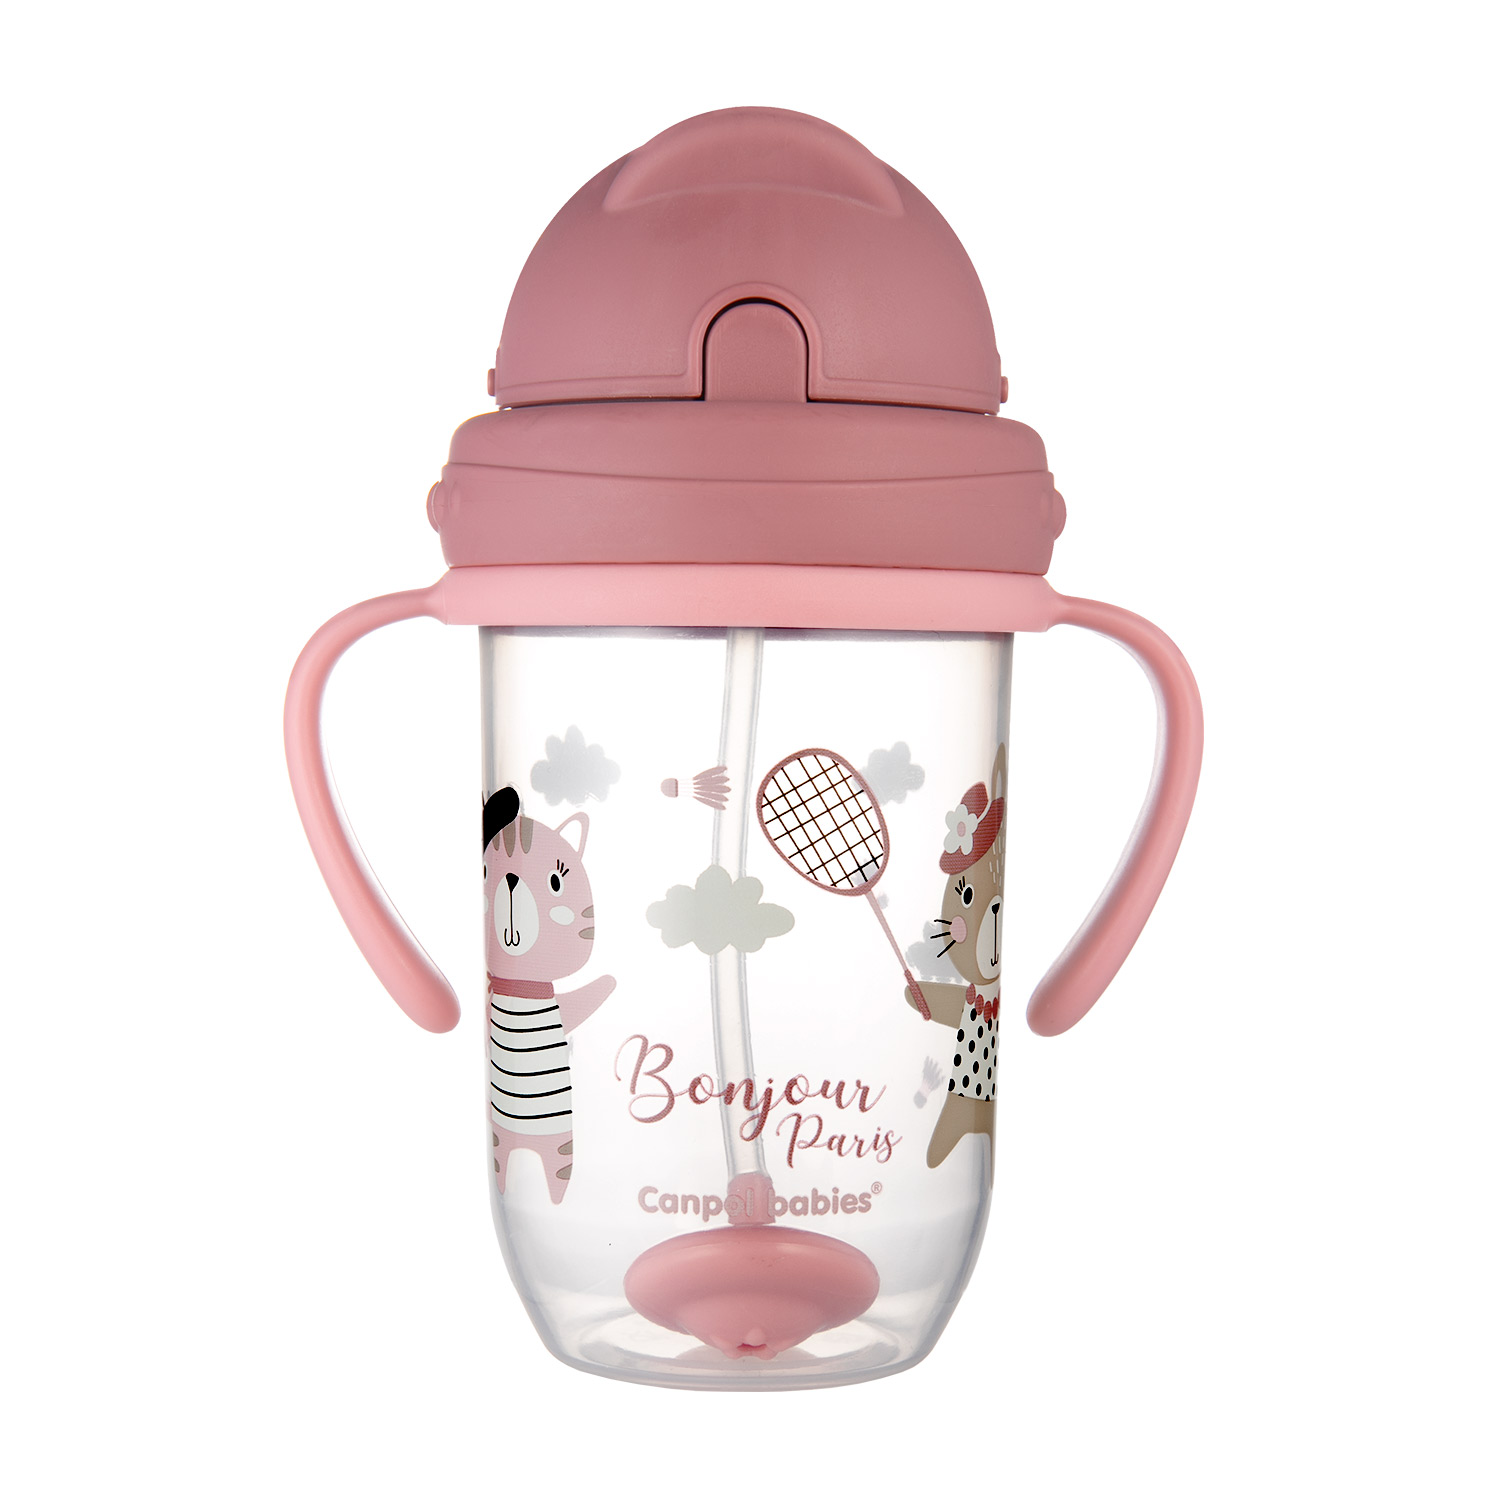 https://canpolbabies.com/eCatalog/canpol/eating-and-drinking/cups-and-sport-cups/56-607-red/56_607_red-item-front-closed.jpg